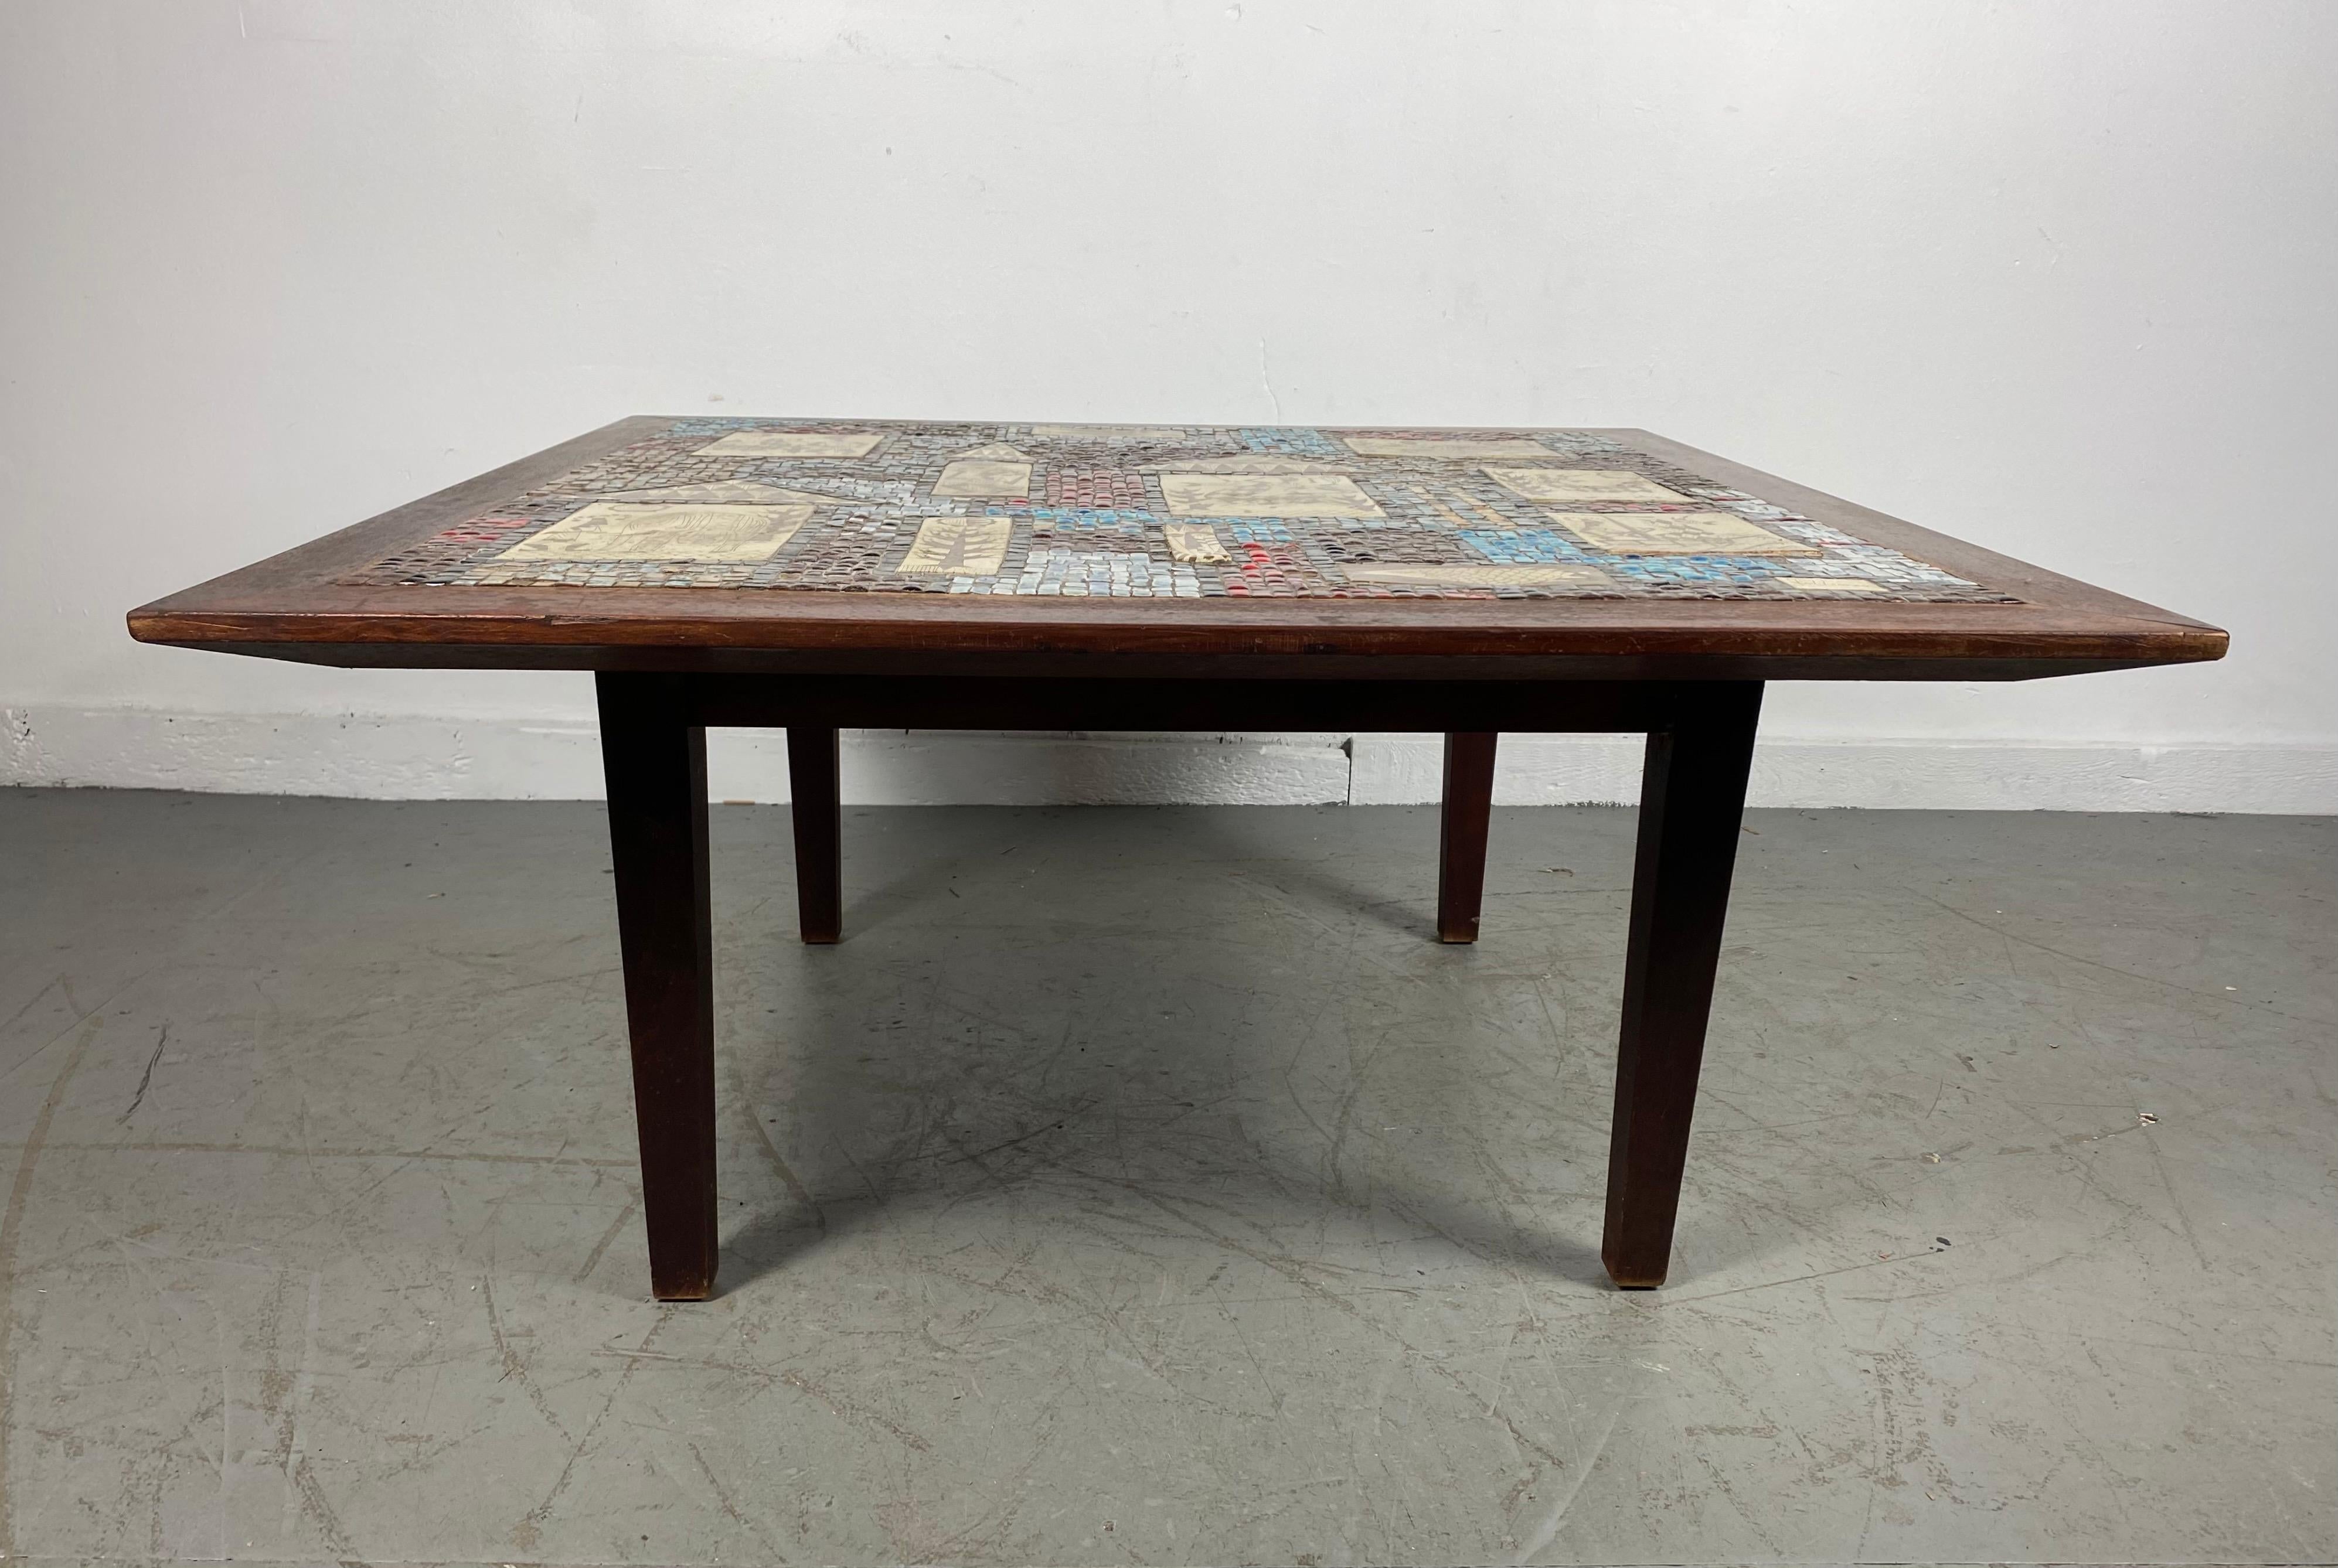 Modernist large mosaic tile top cocktail table by David Holleman, stunning mosaics,,colors ,,composition.. Classic mid century modern design,, Signed ,,Hand delivery avail to New York City or anywhere en route from Buffalo NY.